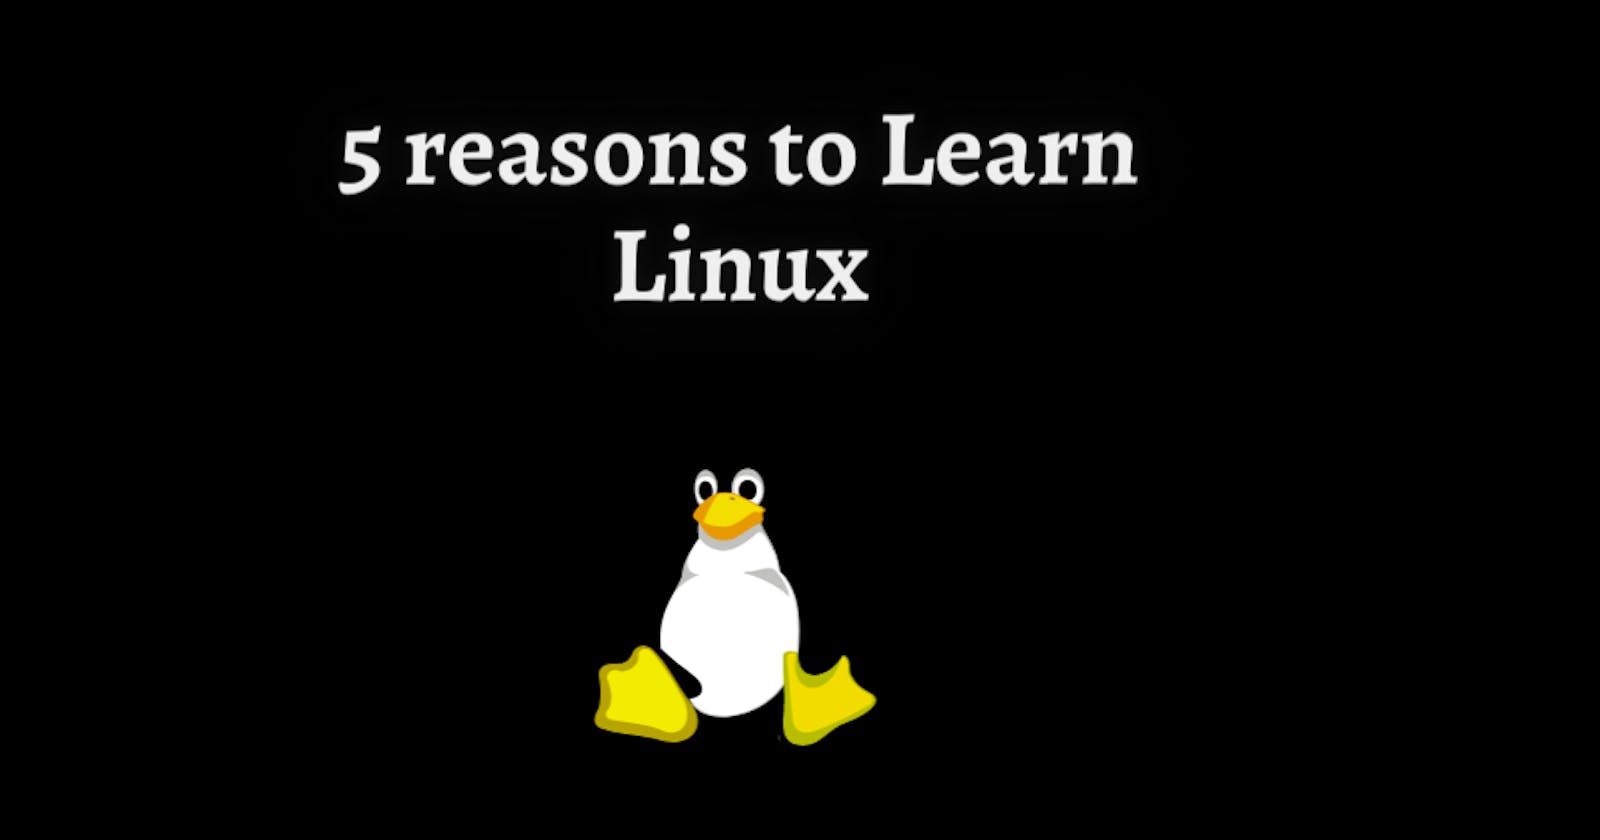 Why you should switch/use Linux?